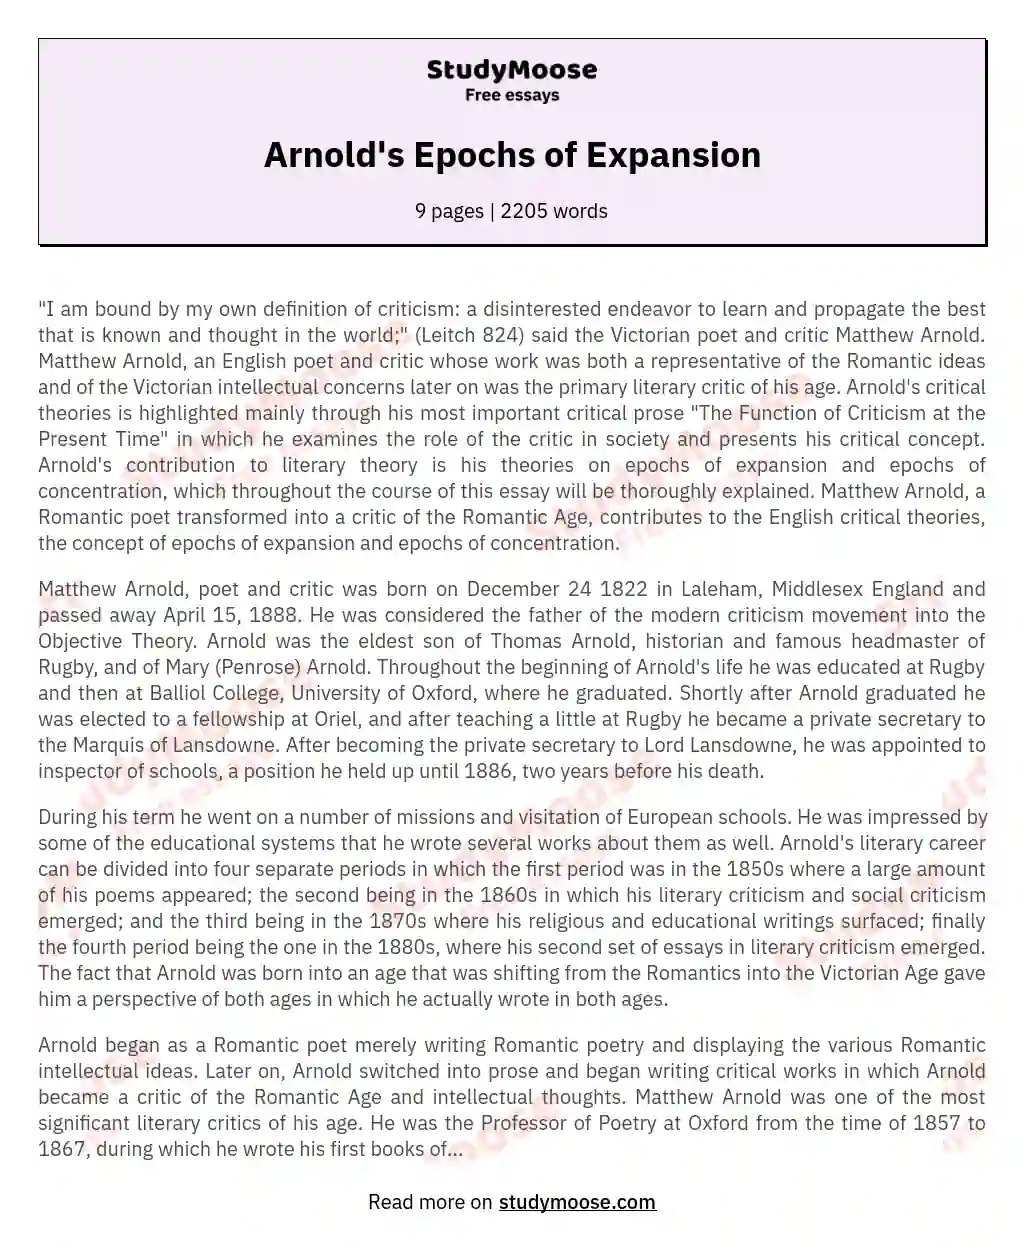 Arnold's Epochs of Expansion